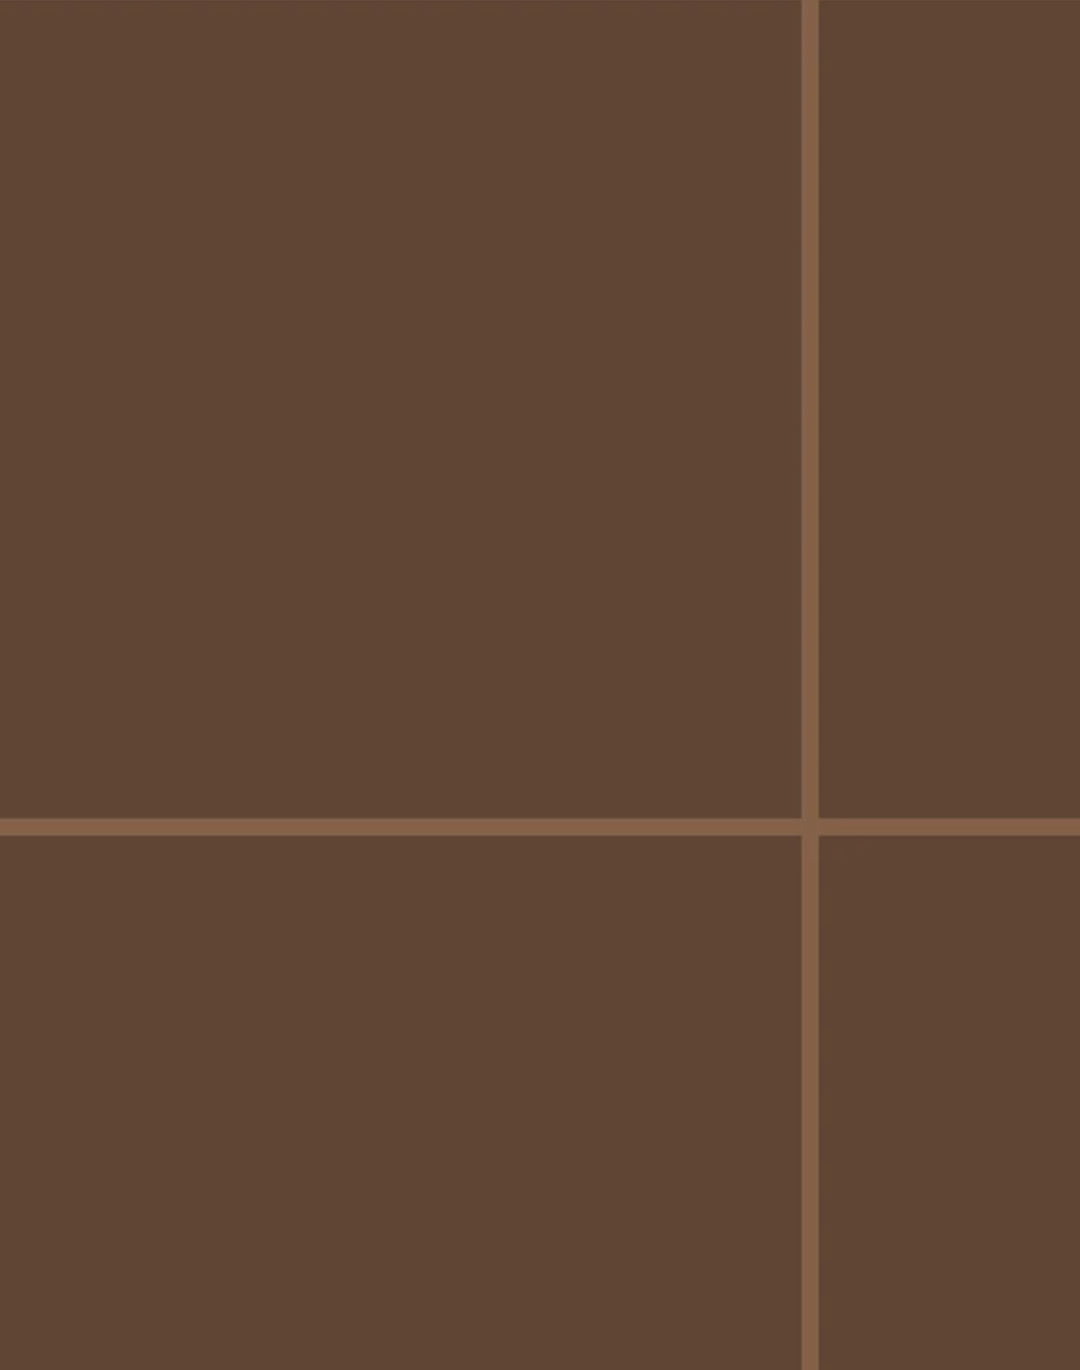 Grid - Large Thin, Line: Light Brown | Background: Brown